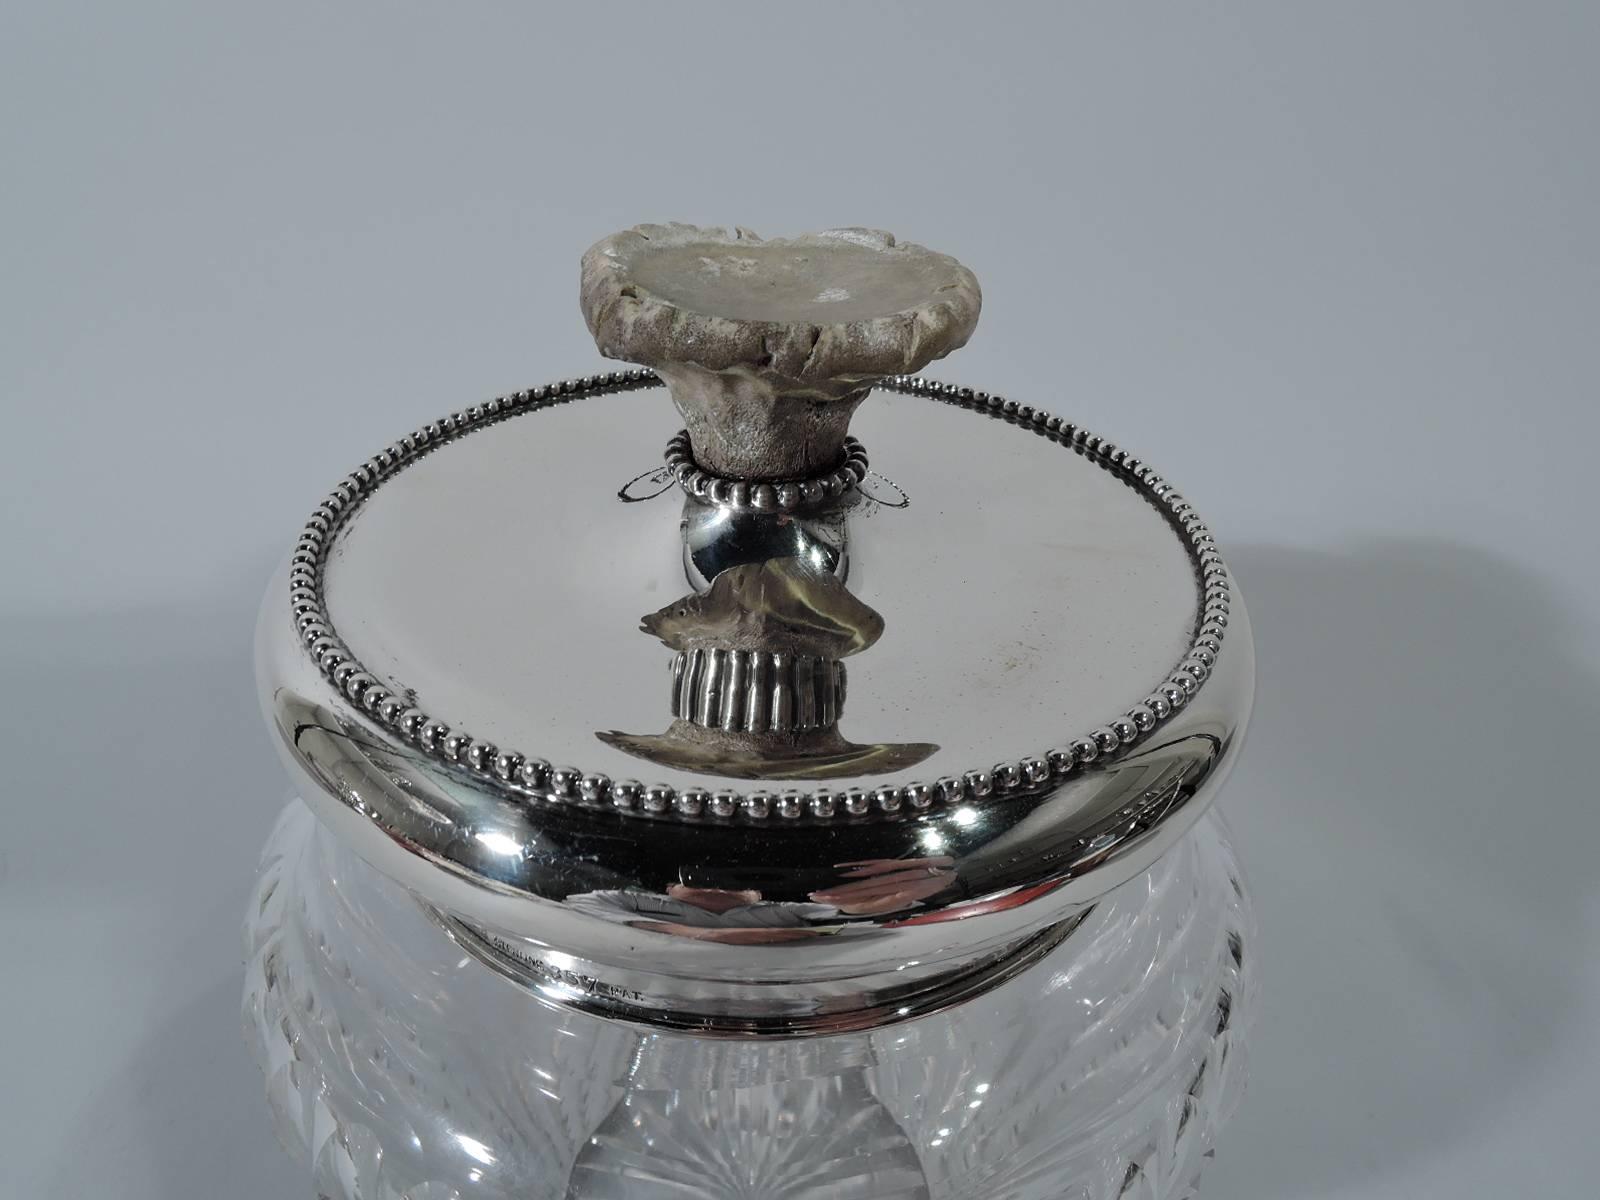 Edwardian Antique Cut-Glass and Sterling Silver Tobacco Jar with Antler Finial